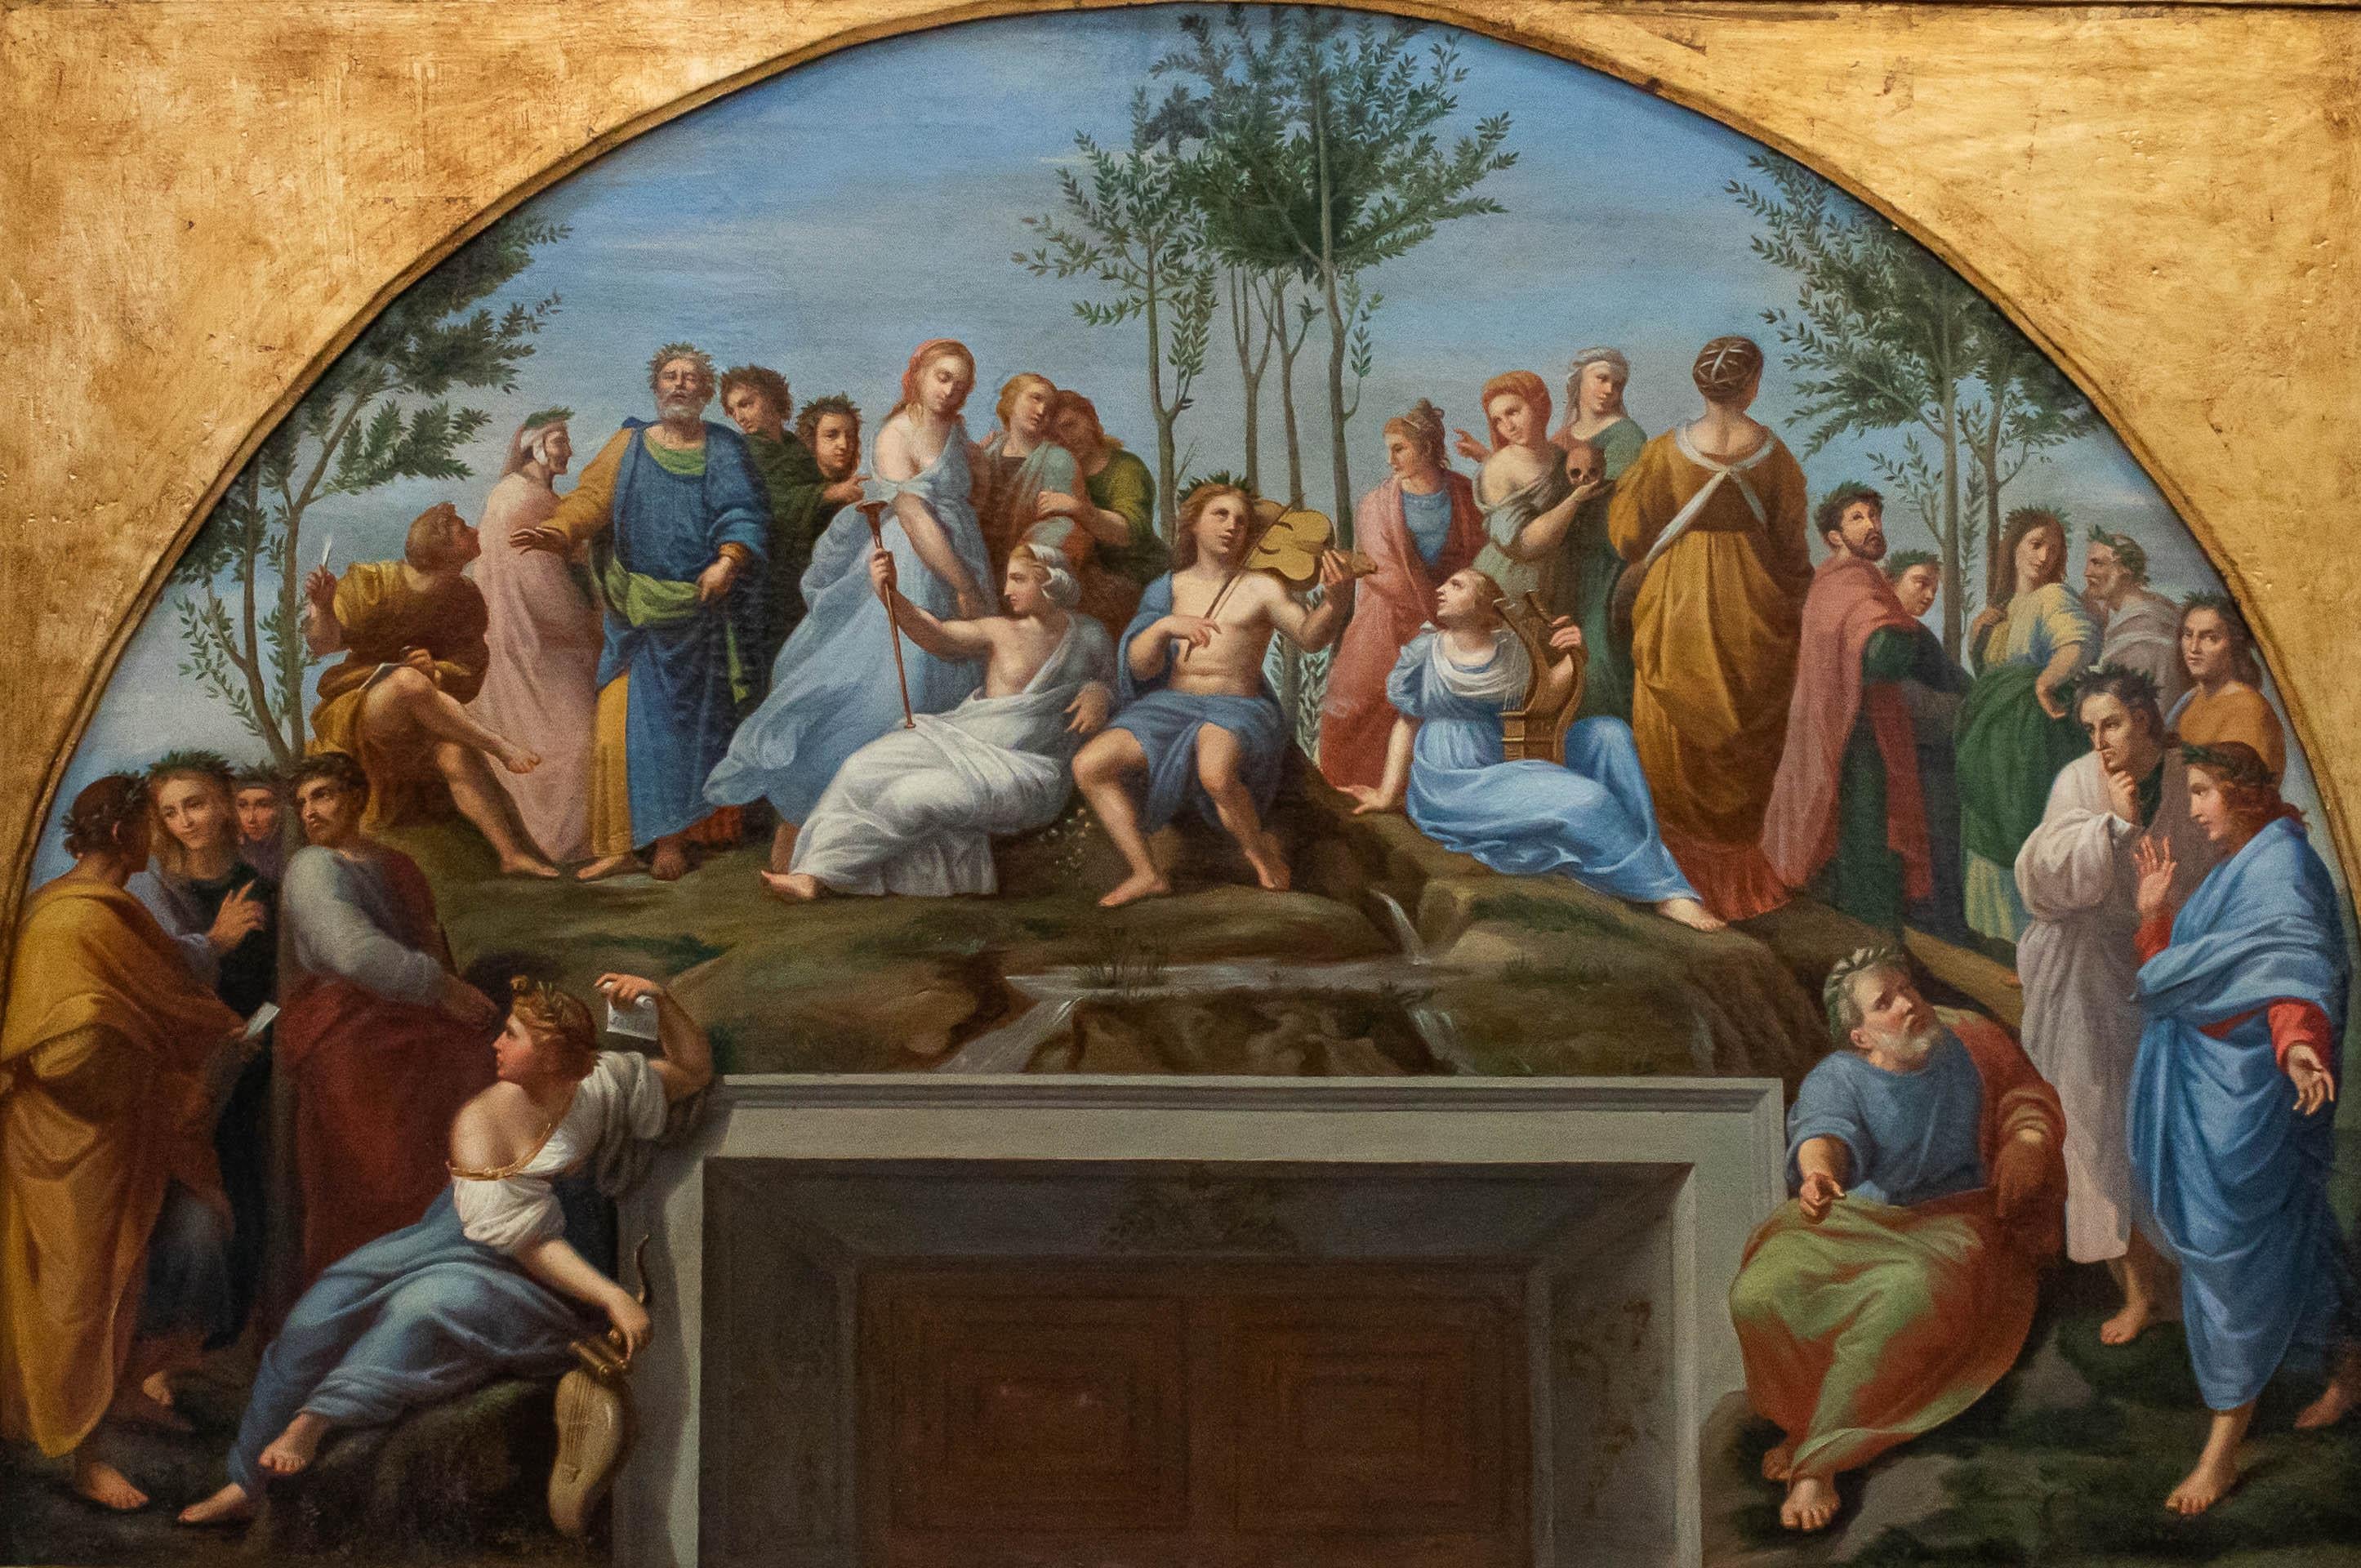 19th century, by Raffaello Sanzio (Urbino, 1483 - Rome, 1520)
The Parnassus
Oil on canvas, 65.5 x 100 cm
Frame 95 x 129 cm

The work examined takes up the fresco by Raphael created to decorate one of the walls of the Stanza della Segnatura of